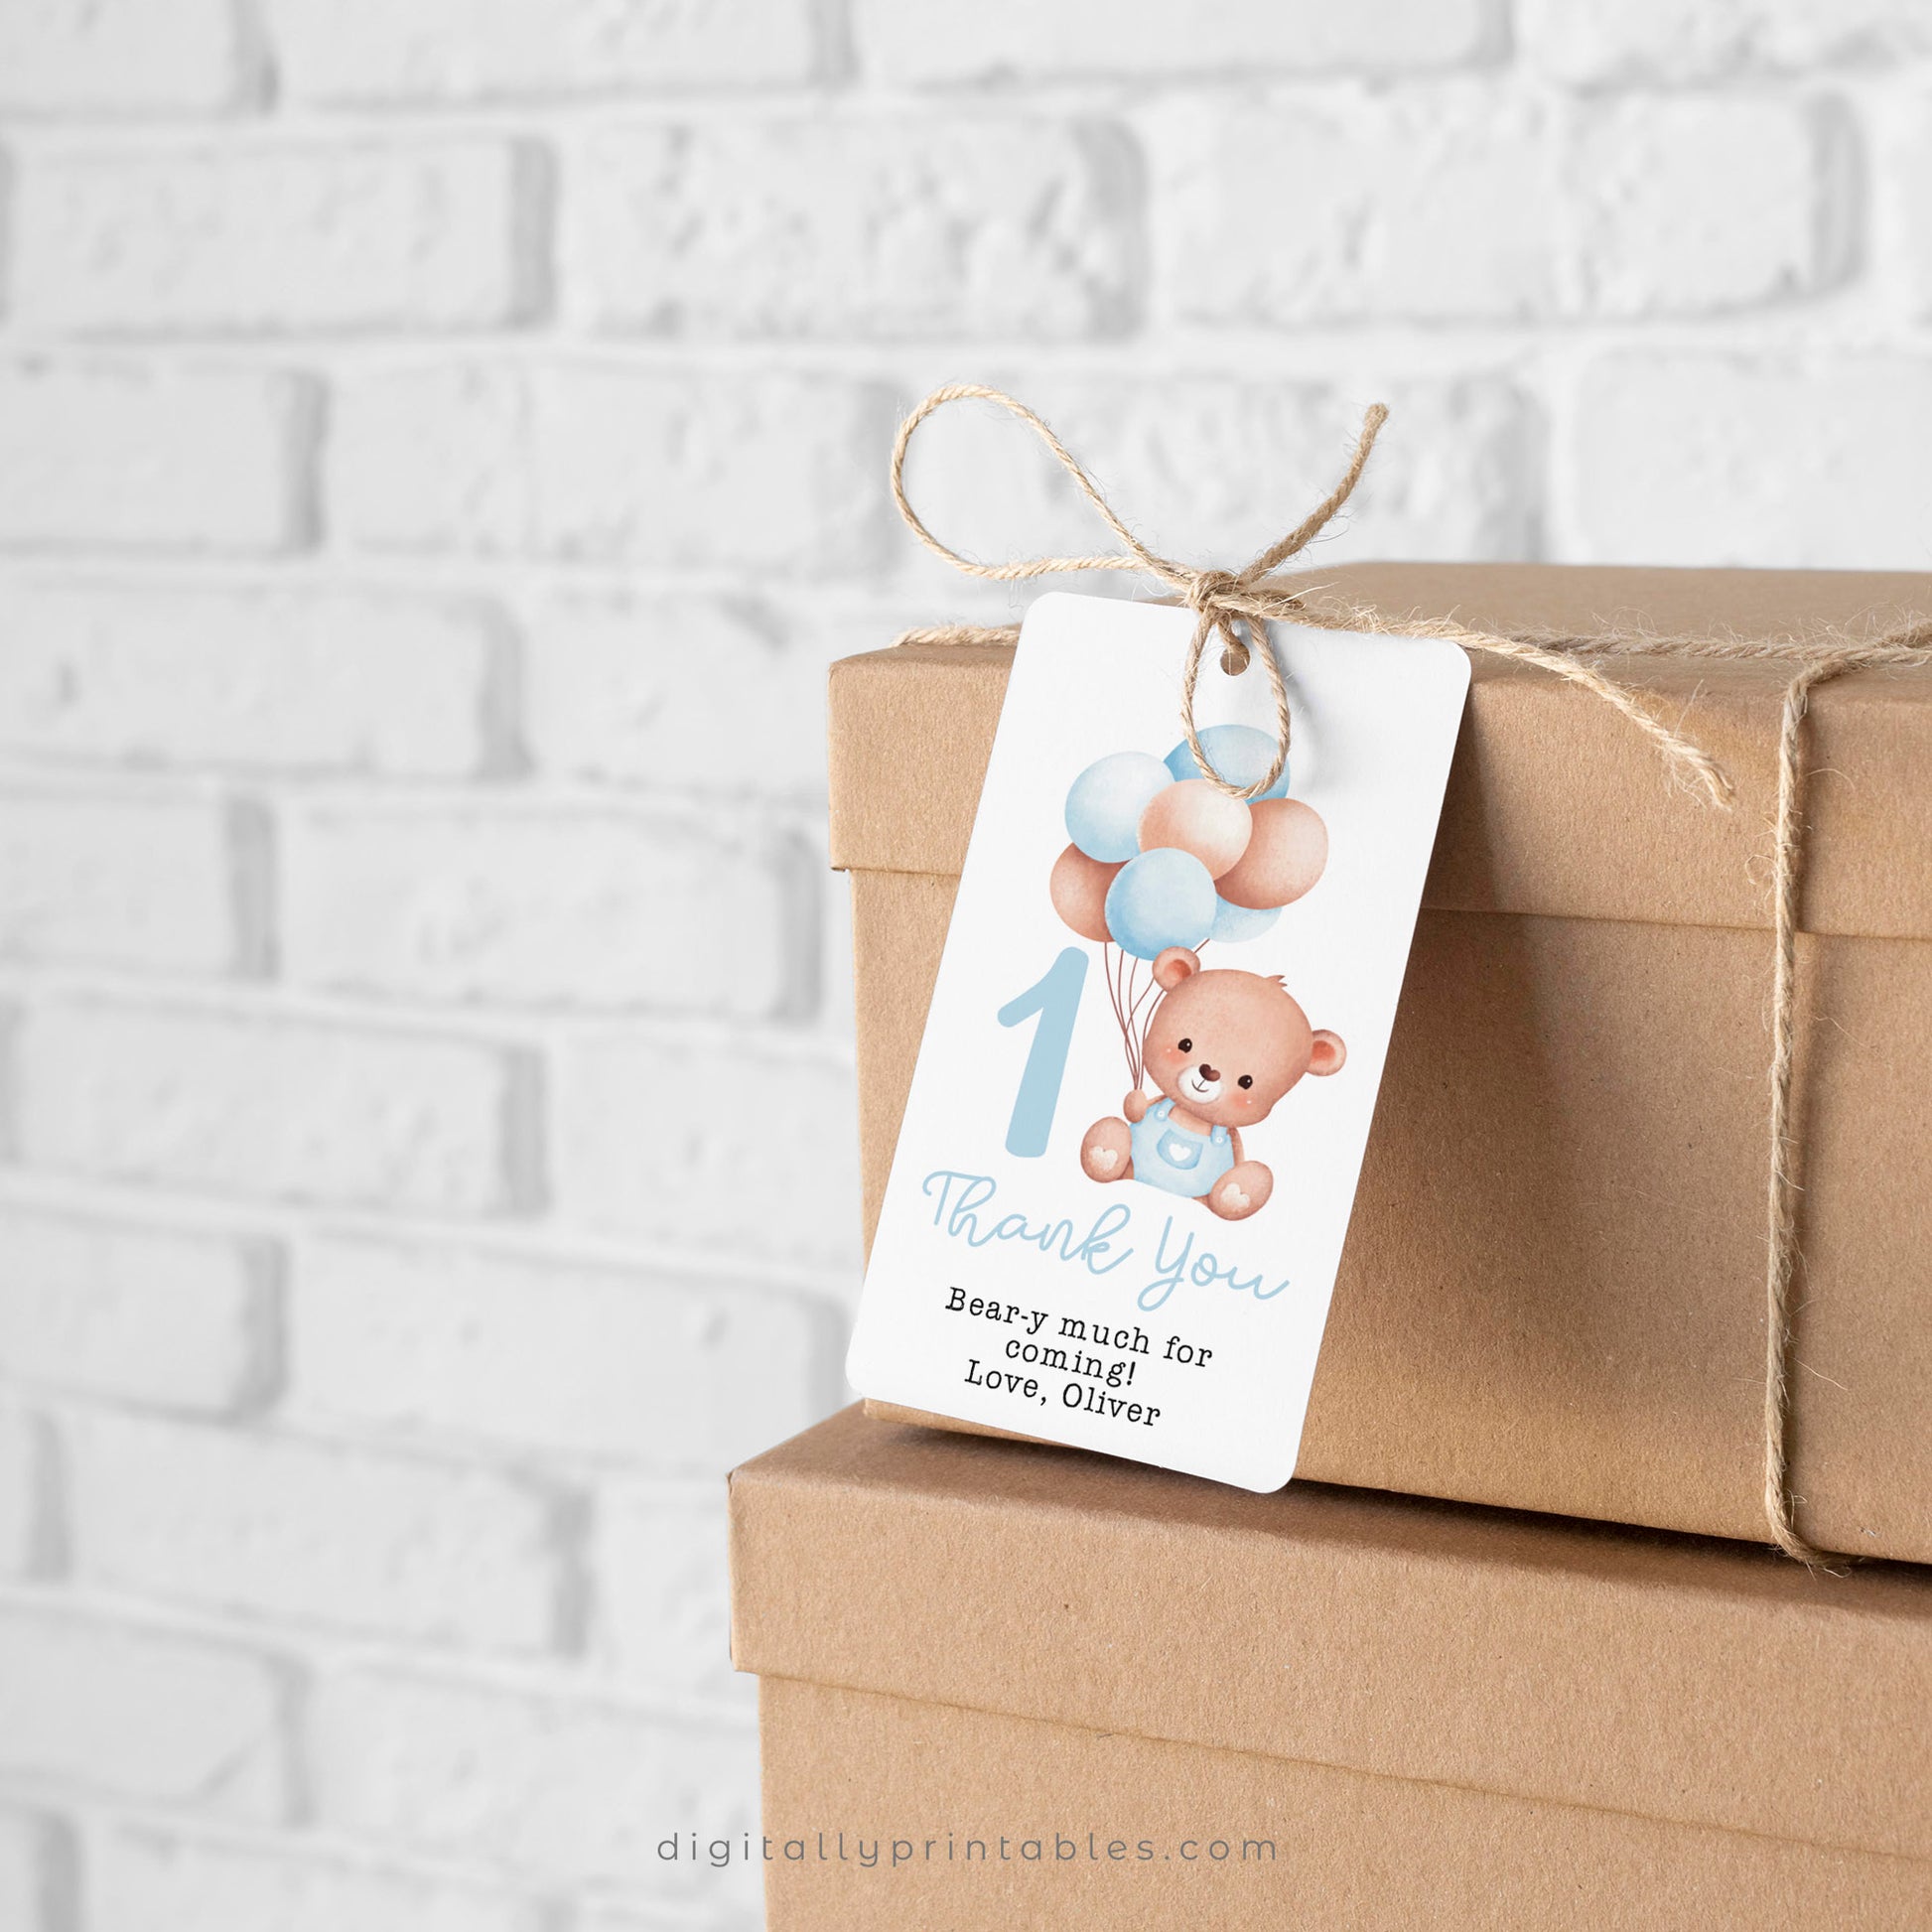 printable thank you tag with a little bear and balloons for a birthday party or baby shower